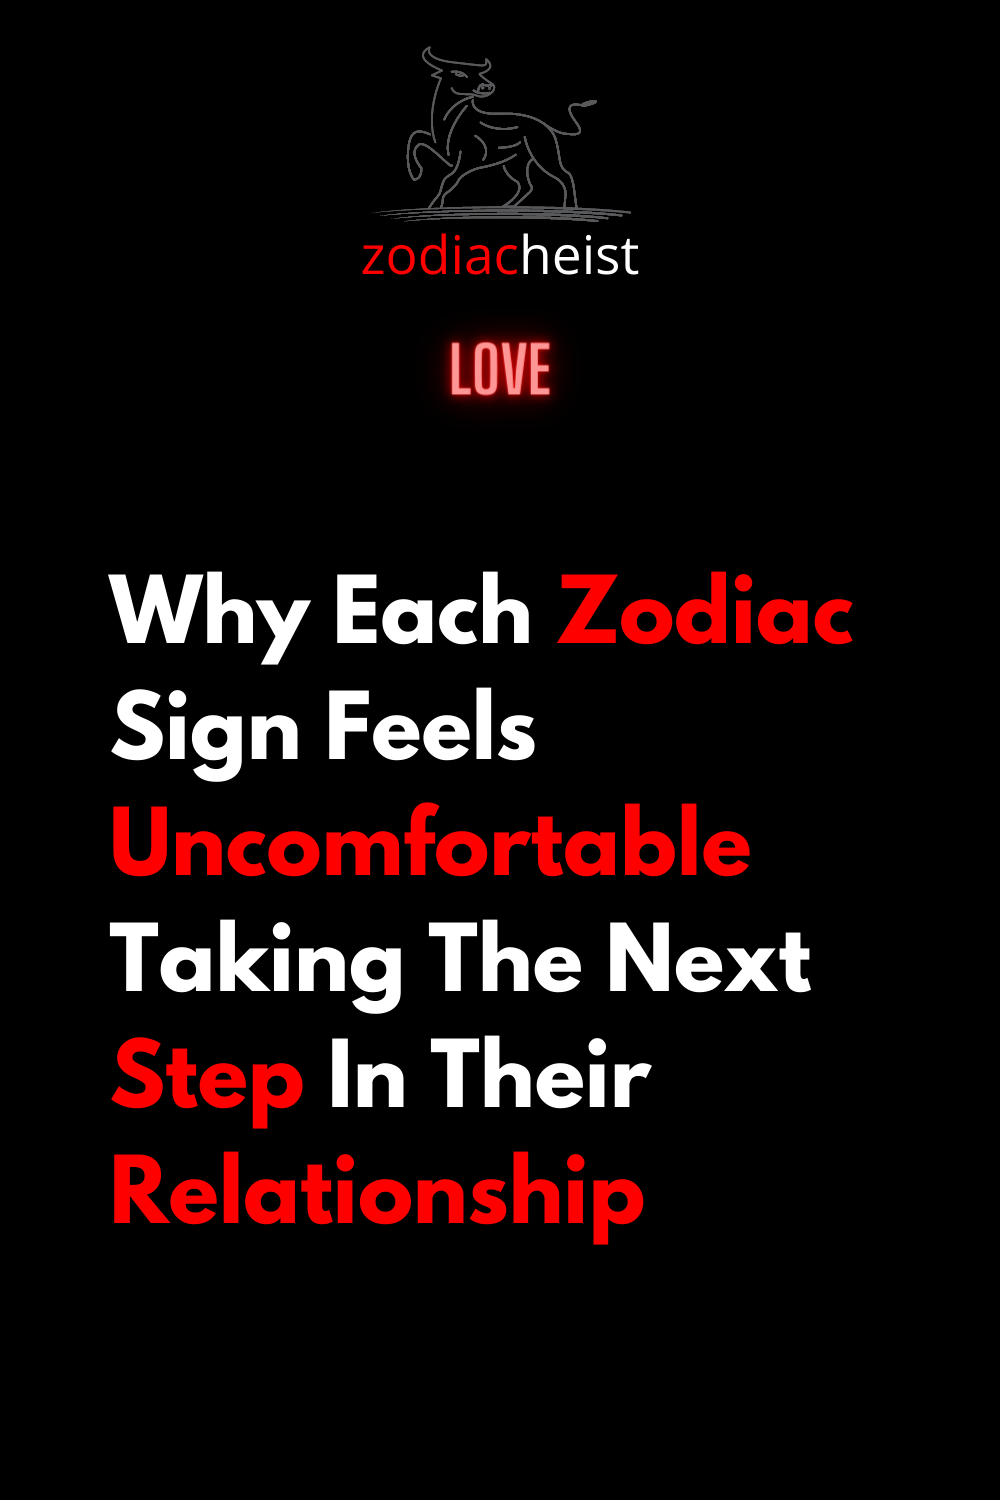 Why Each Zodiac Sign Feels Uncomfortable Taking The Next Step In Their Relationship